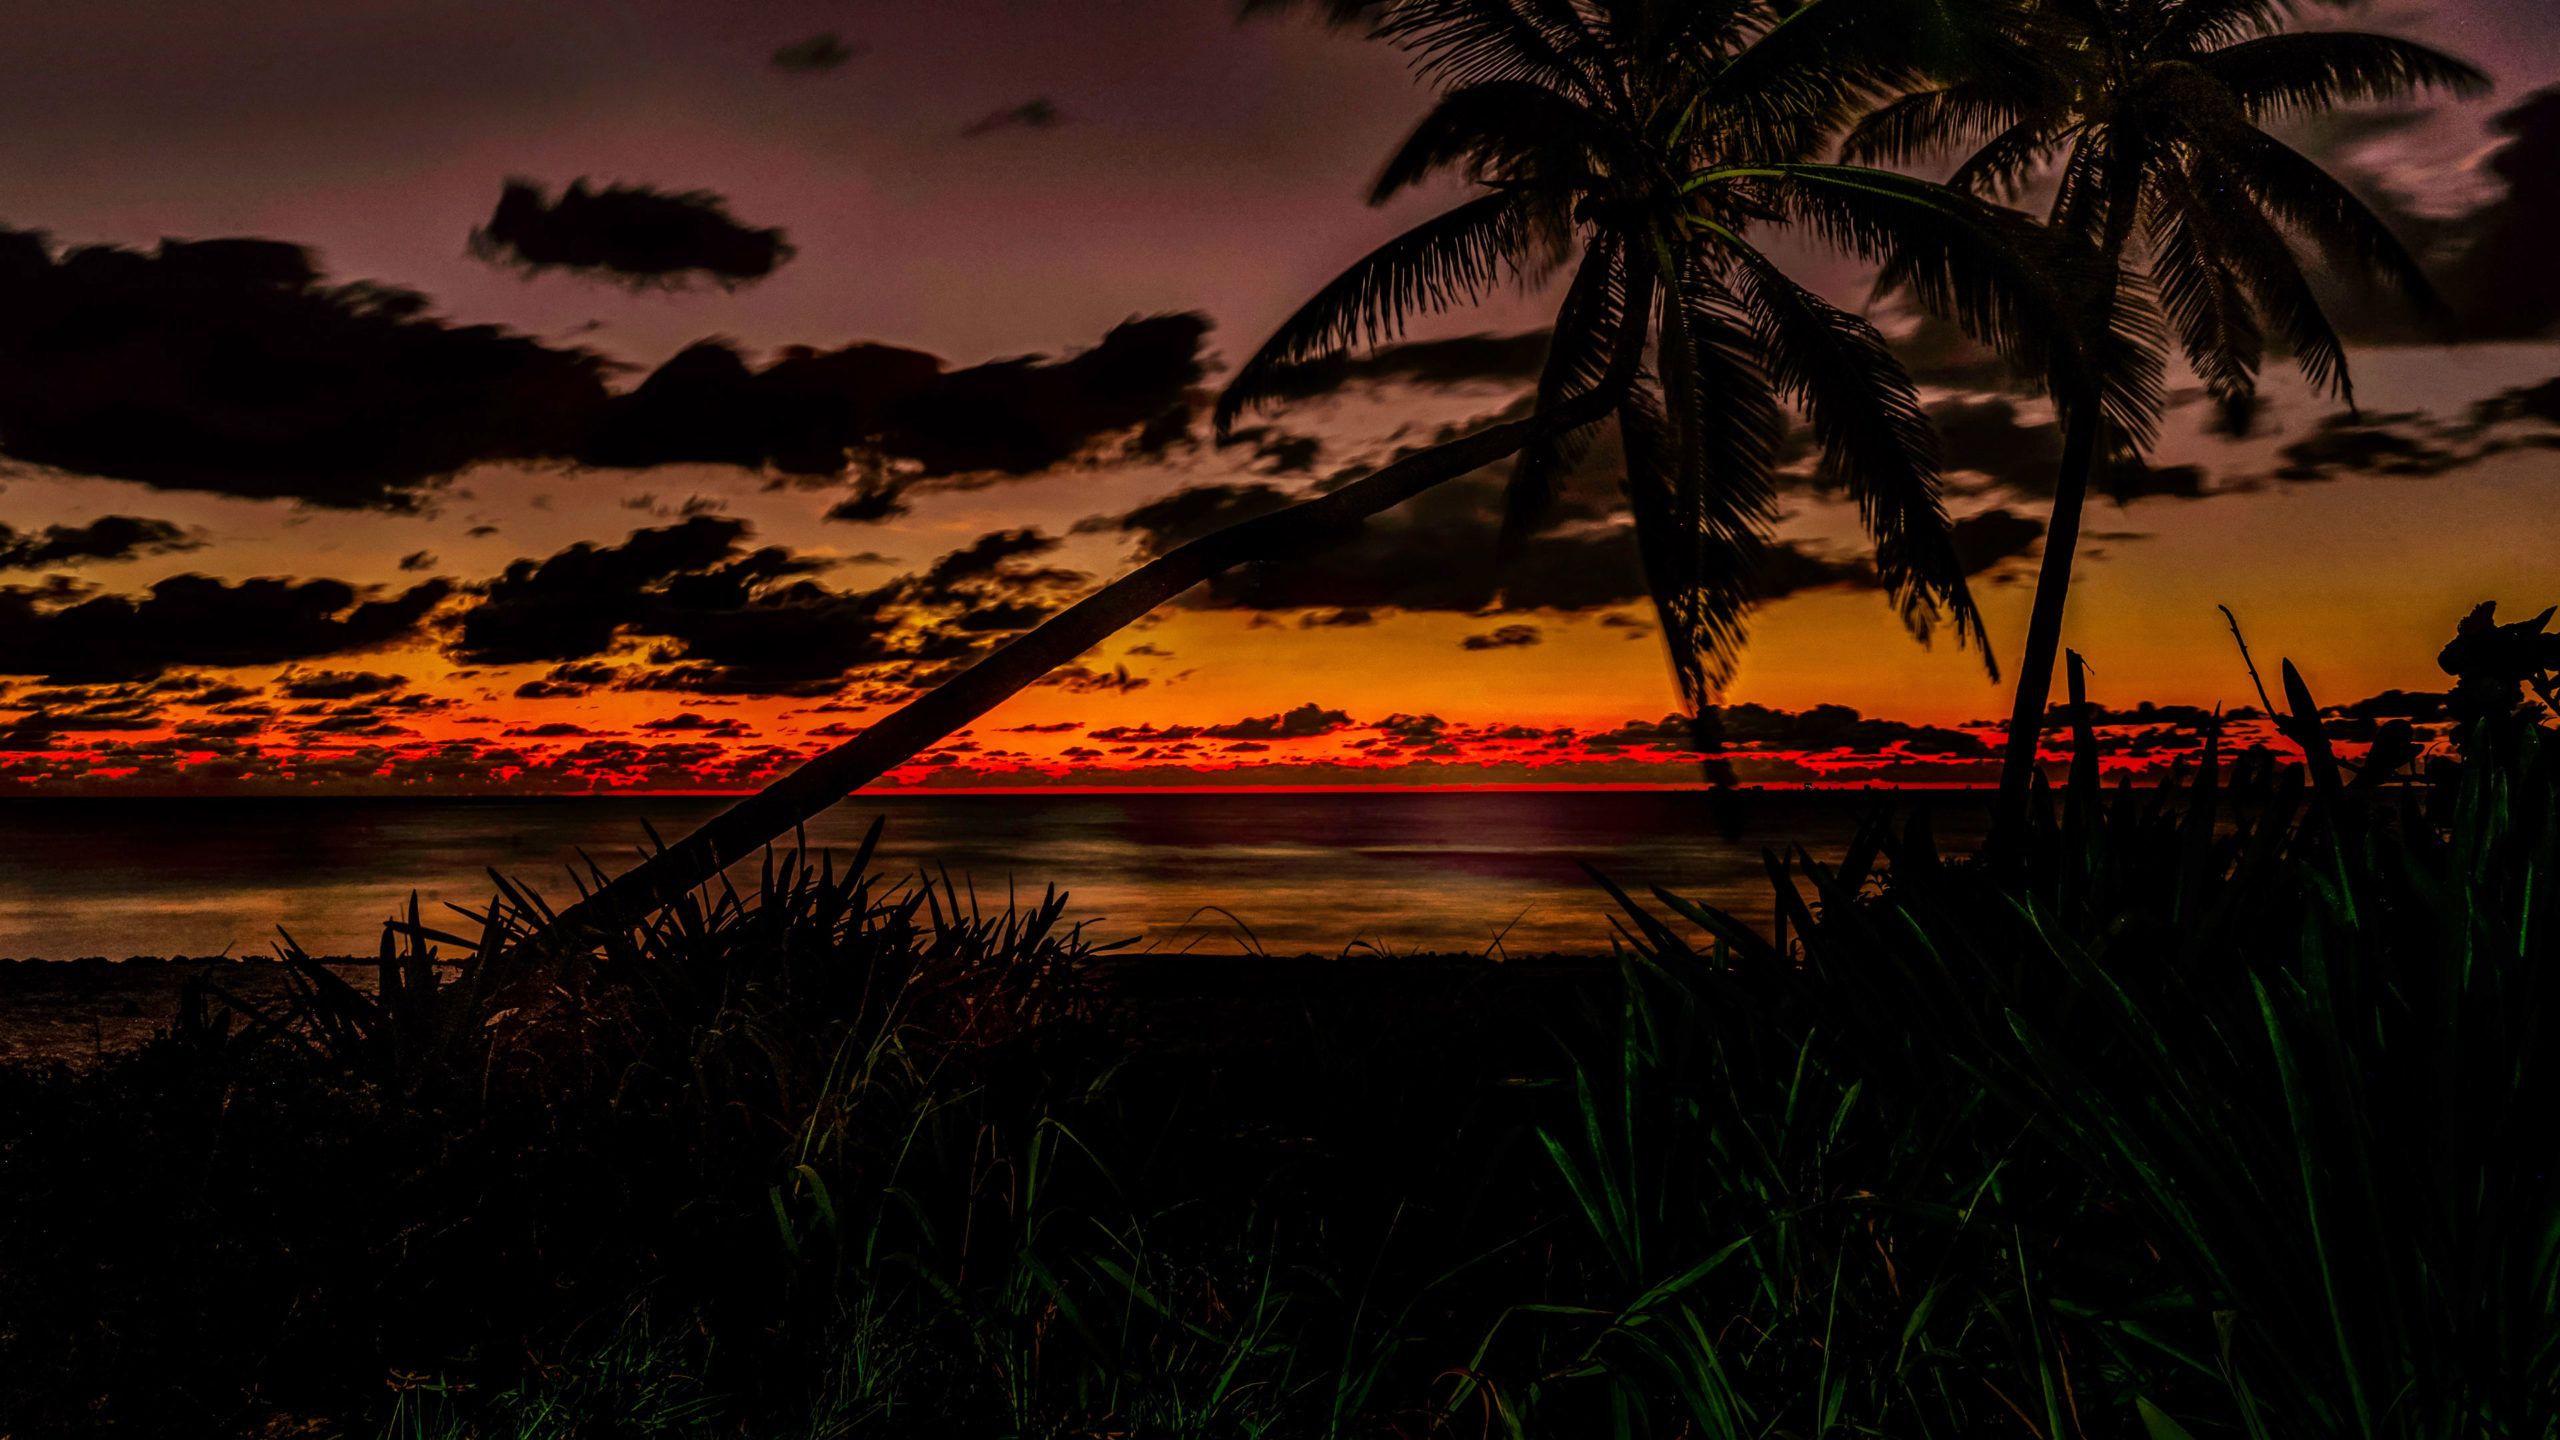 A sunset over the ocean with palm trees - Ocean, sunrise